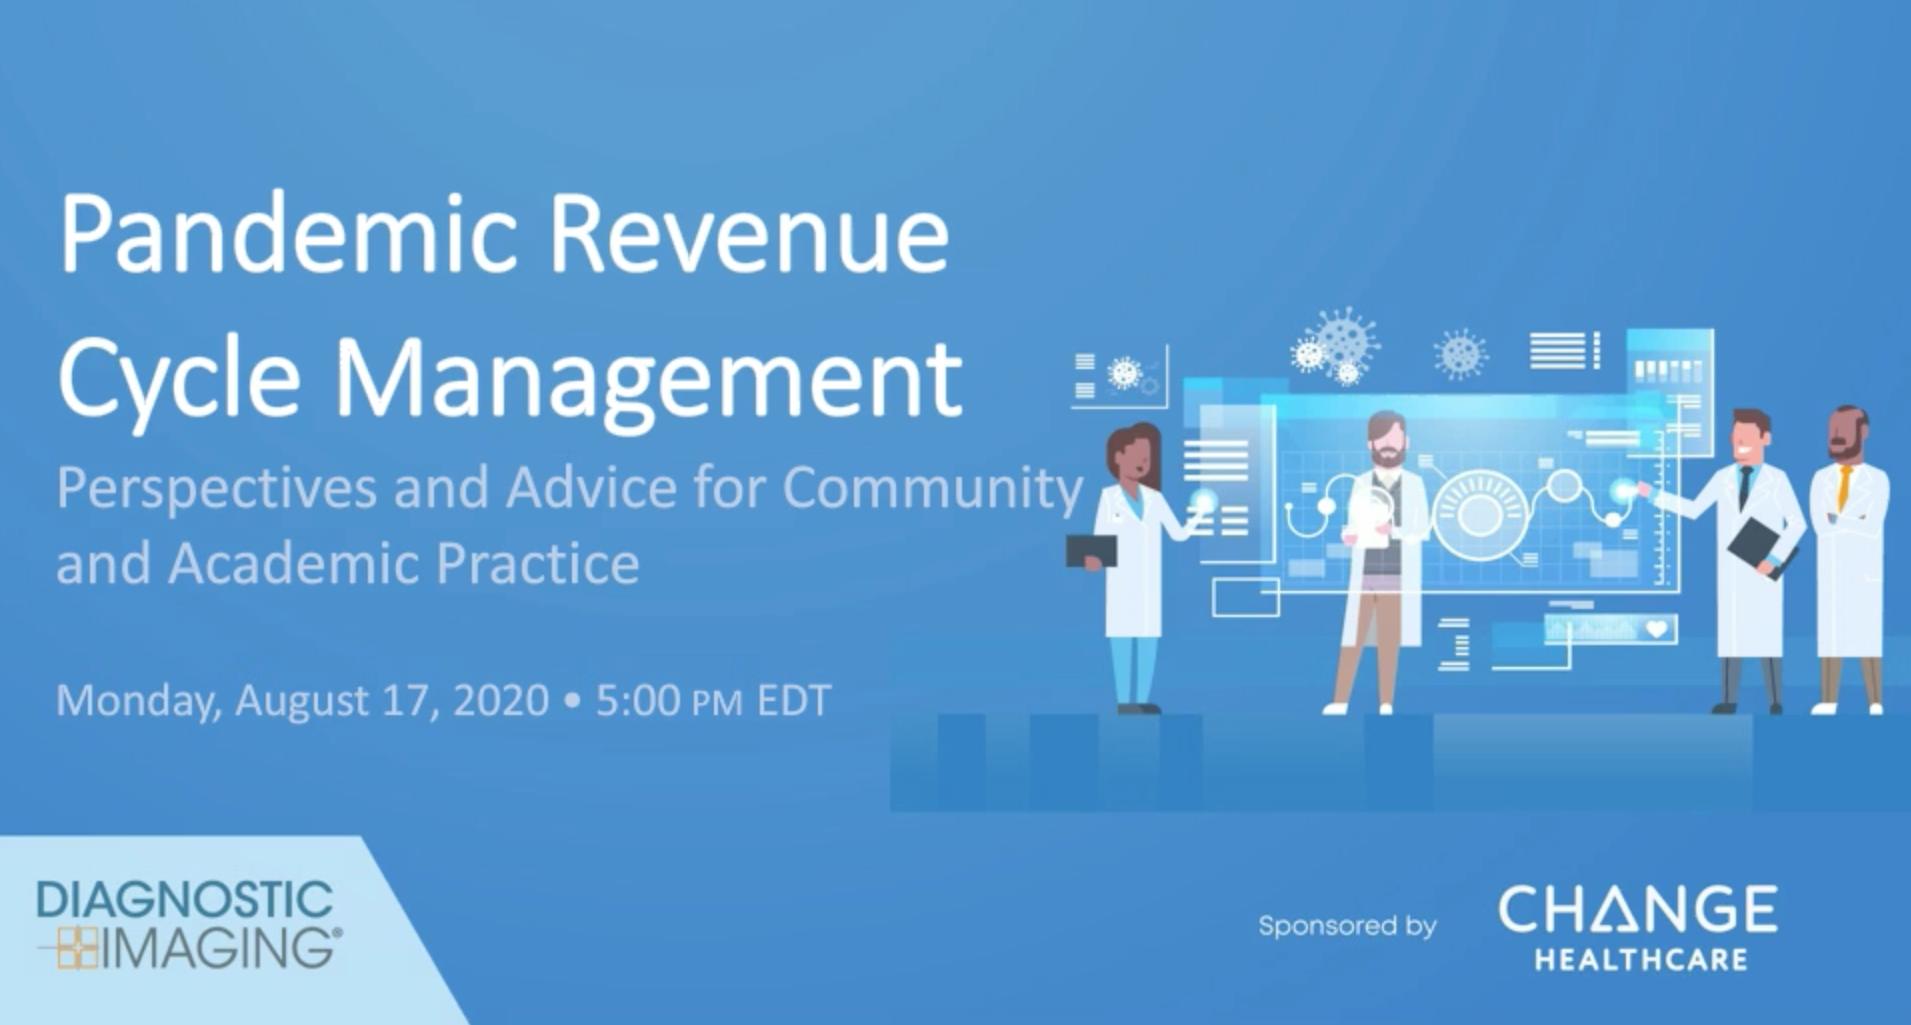 Revenue Cycle Management for the Pandemic